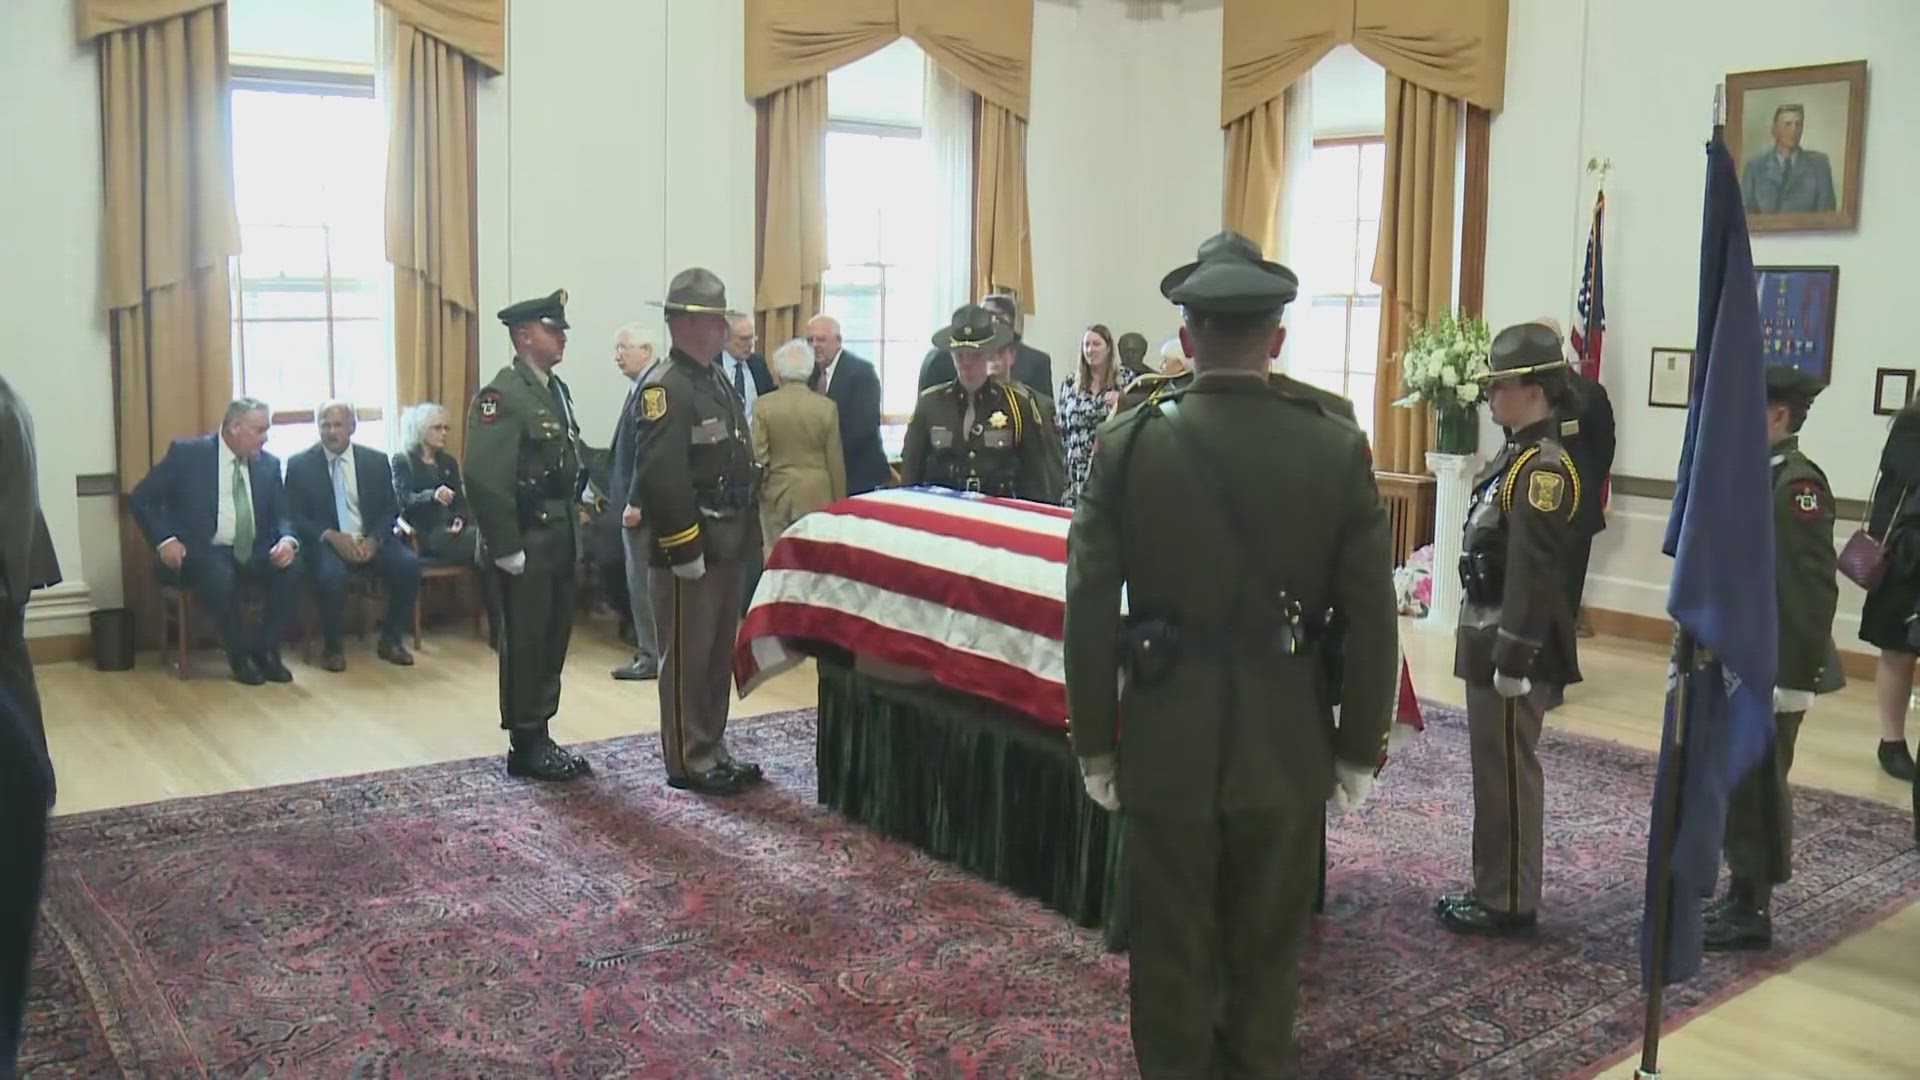 Former Maine Gov. Joe Brennan will be laid to rest following a funeral service in his home city of Portland on Friday.